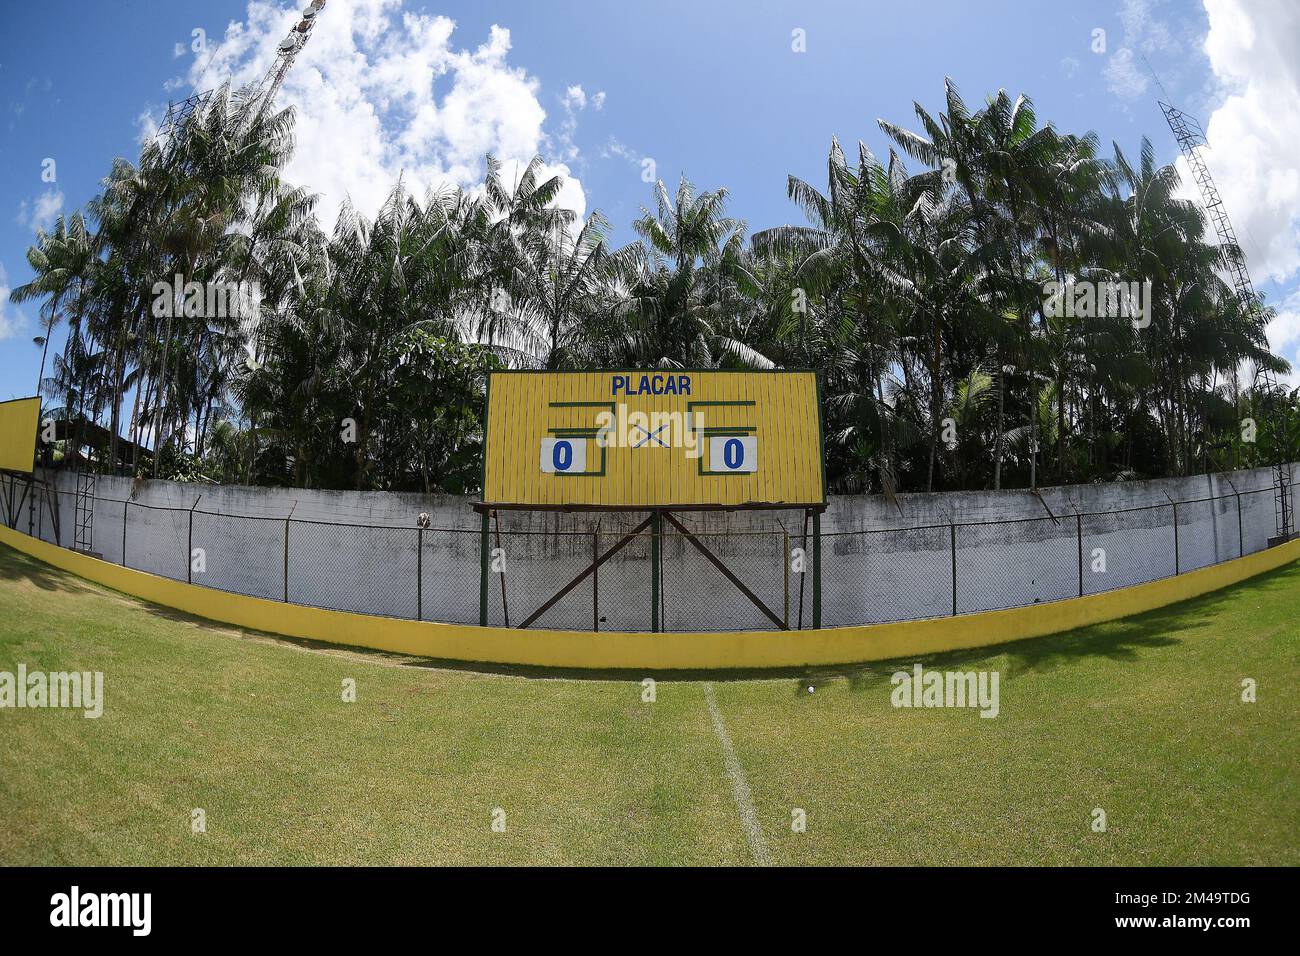 Afuá,Brazil,November 11, 2021. Manual score of the football stadium Décio Gonçalves Quintas, in the city of Afuá in the state of Pará. Stock Photo